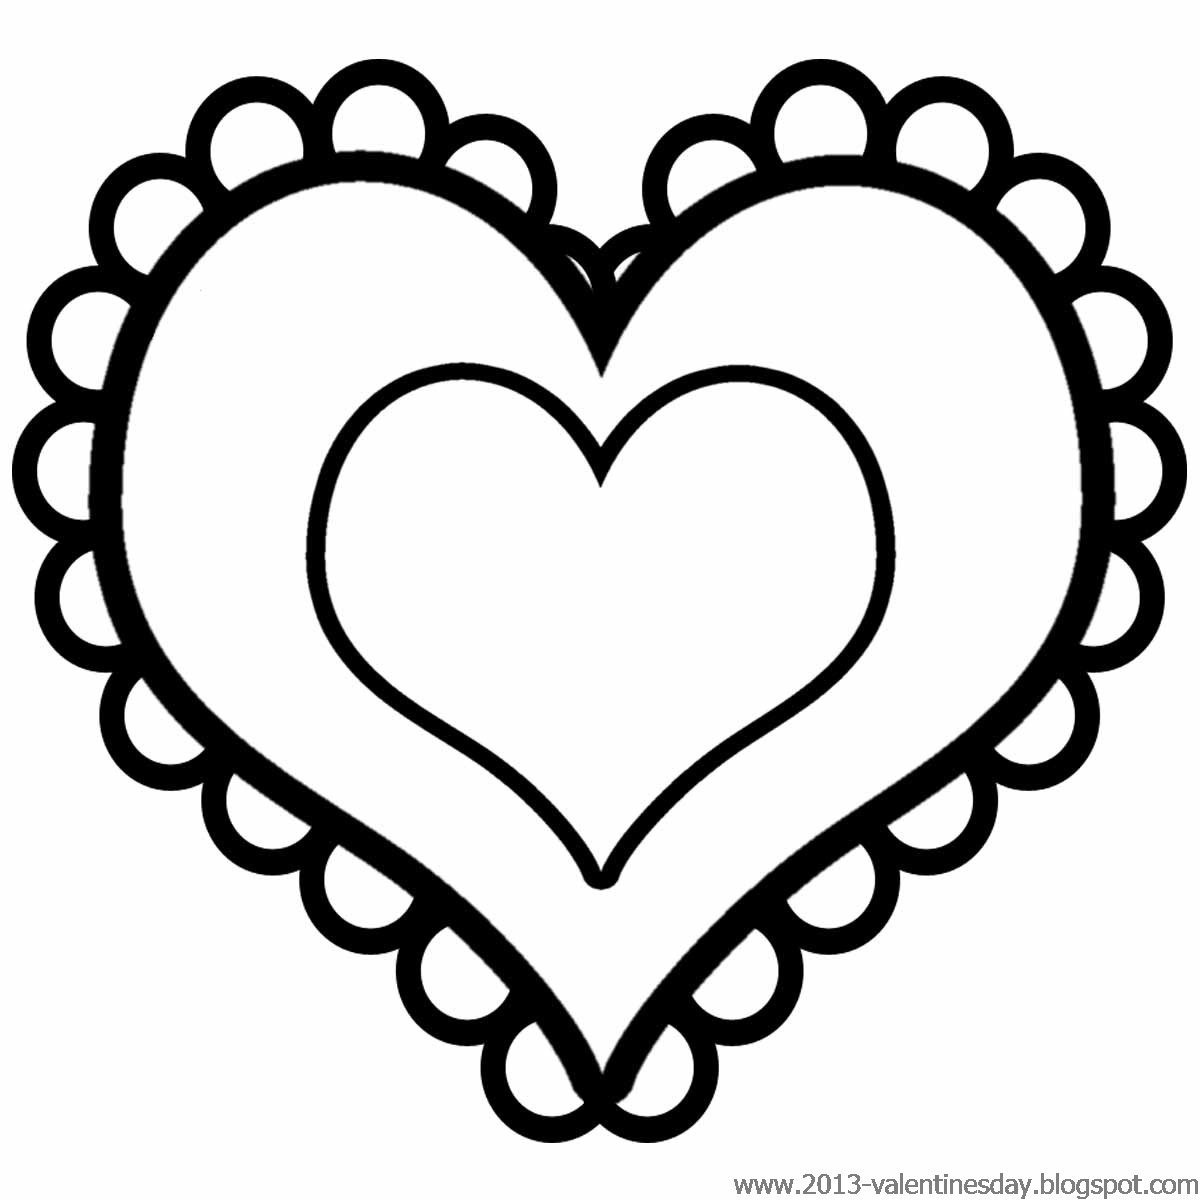 Heart Clipart Black And White - free clipart downloading - thank you heart clipart, simple heart clipart, silver heart clipart, scribble heart clipart, red heart pictures clip art, king of hearts clipart, interlocking hearts clipart, infinity heart clipart, helping hands caring hearts clip art, heart with wings clipart, heart with hands clipart, heart shaped hands clipart, heart health clipart, heart clipart transparent, heart clip art, free clip art images hearts, decorative heart clipart, country heart clip art, black and white heart clip art, arrow with heart clipart